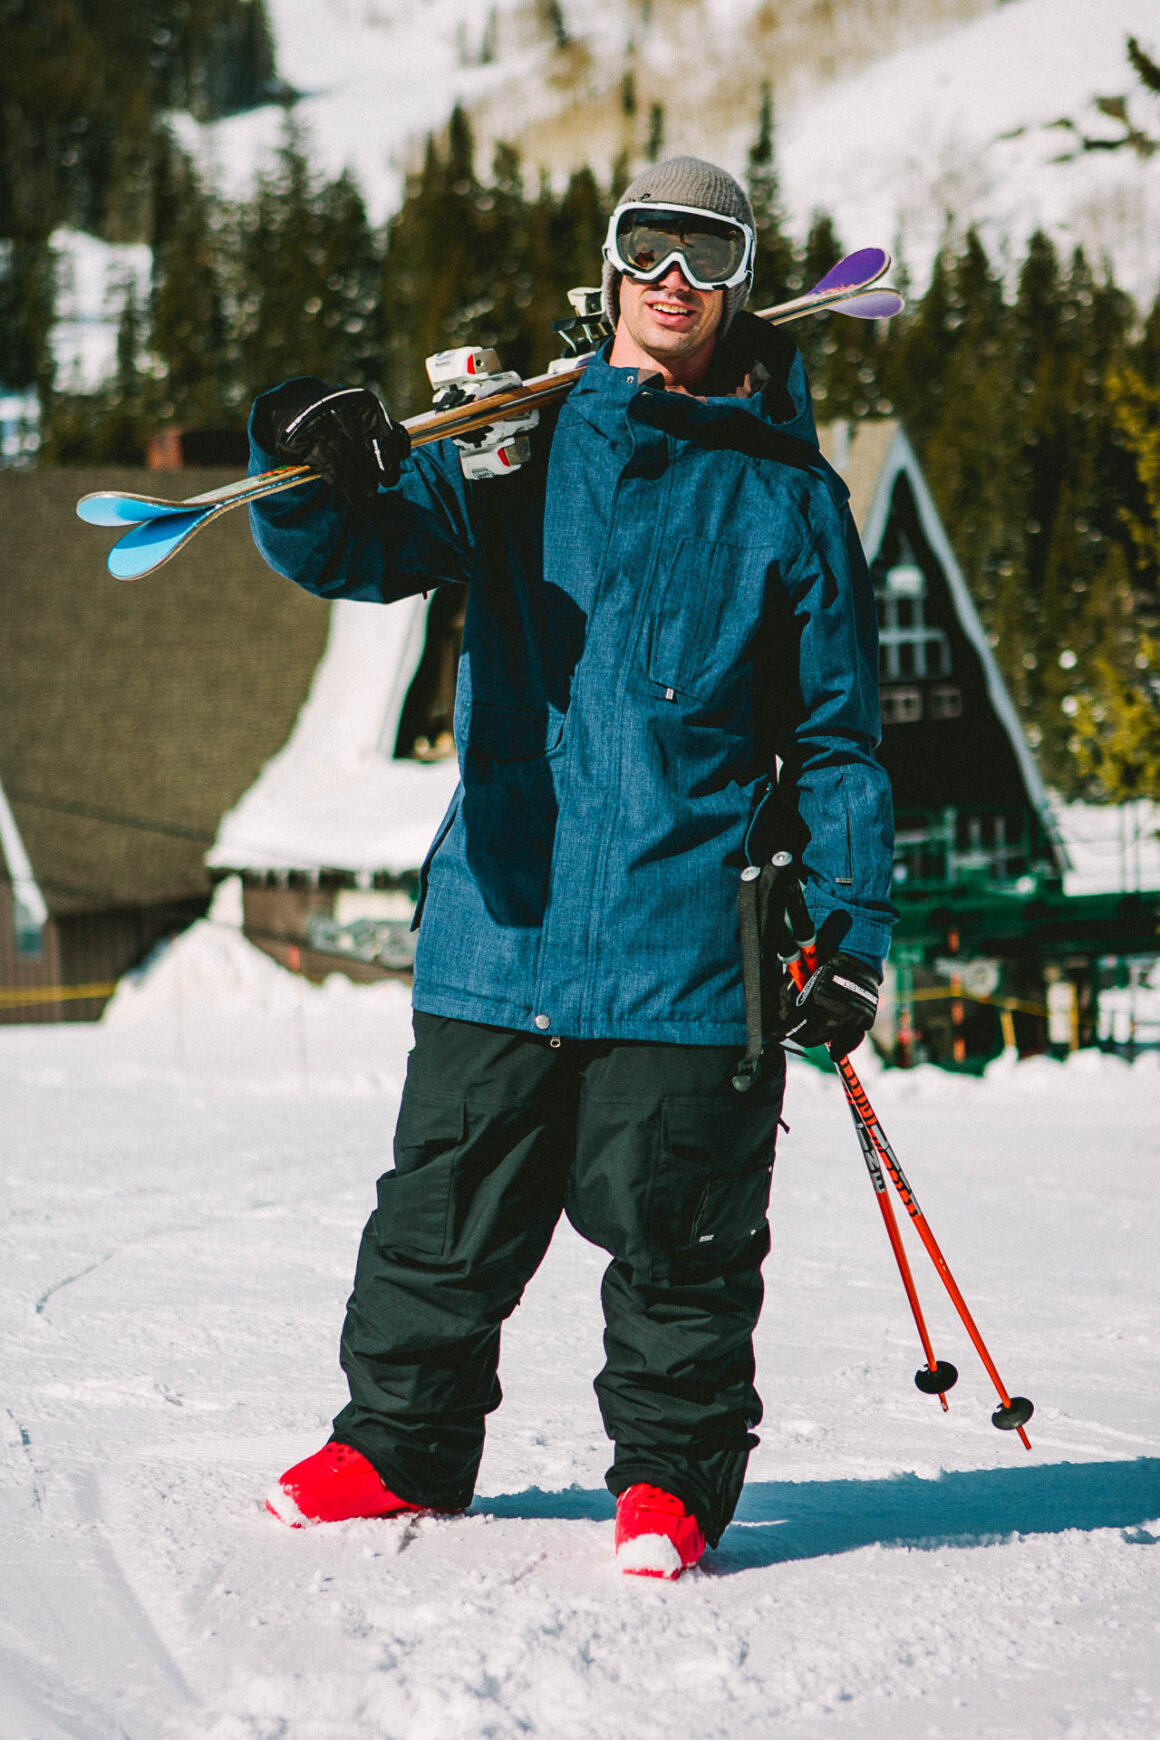 Jason Levinthal with Afterbang Freestyle Line Skis